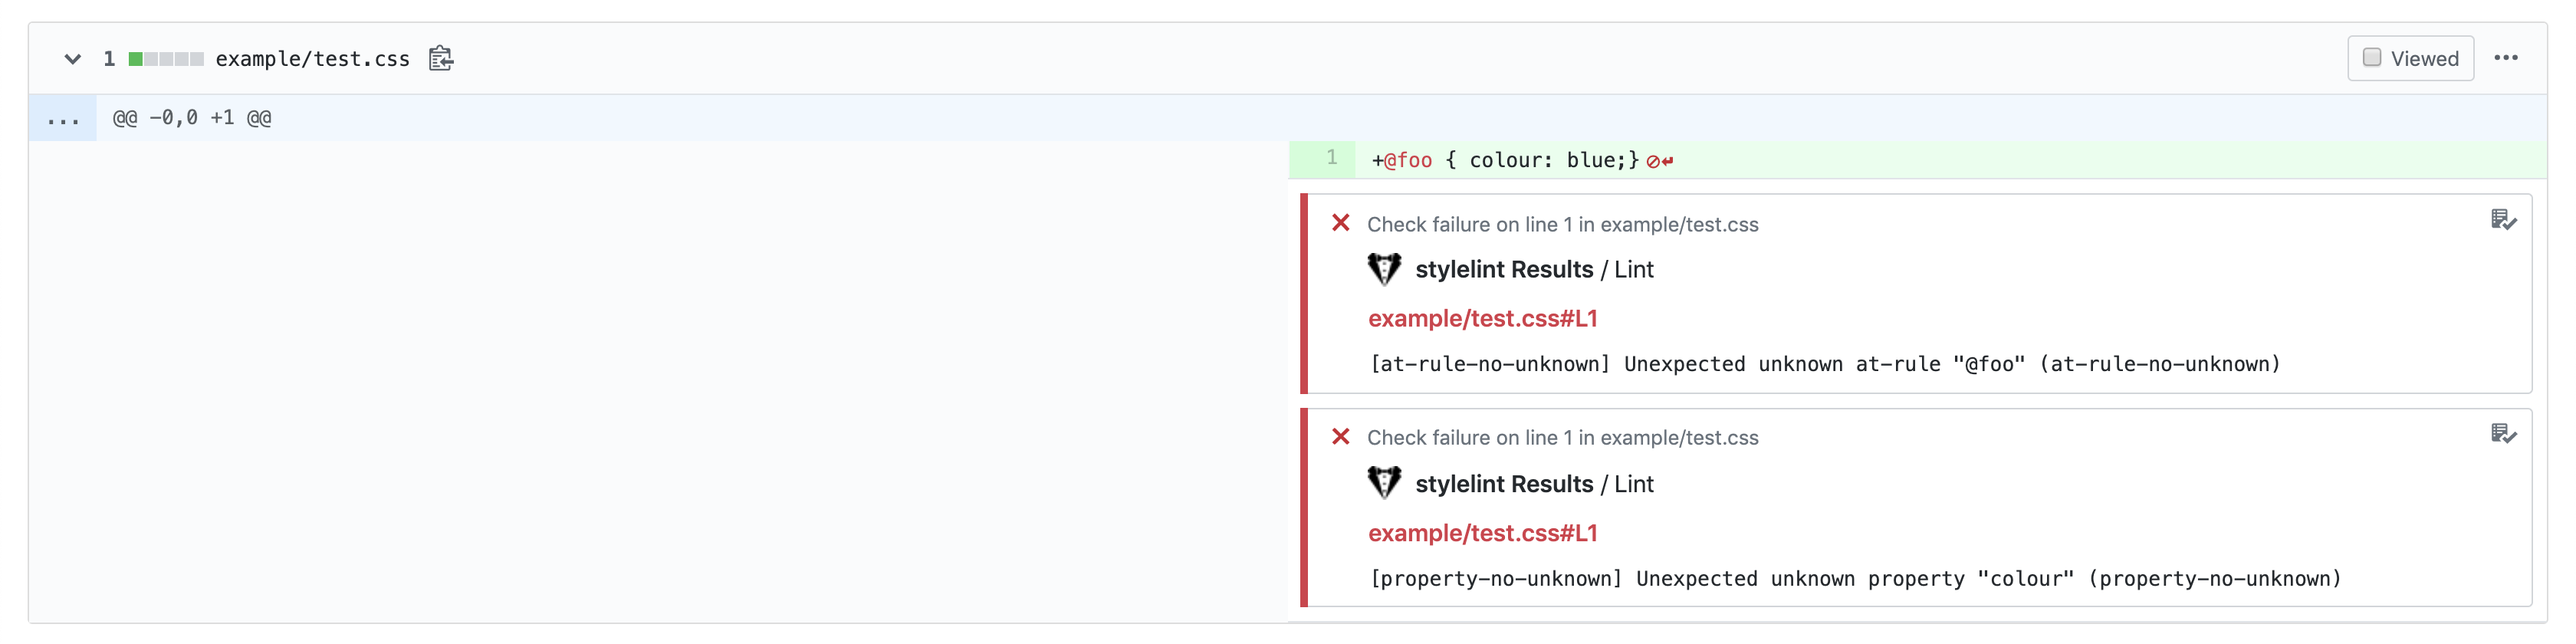 Example of annotations being included in a pull request